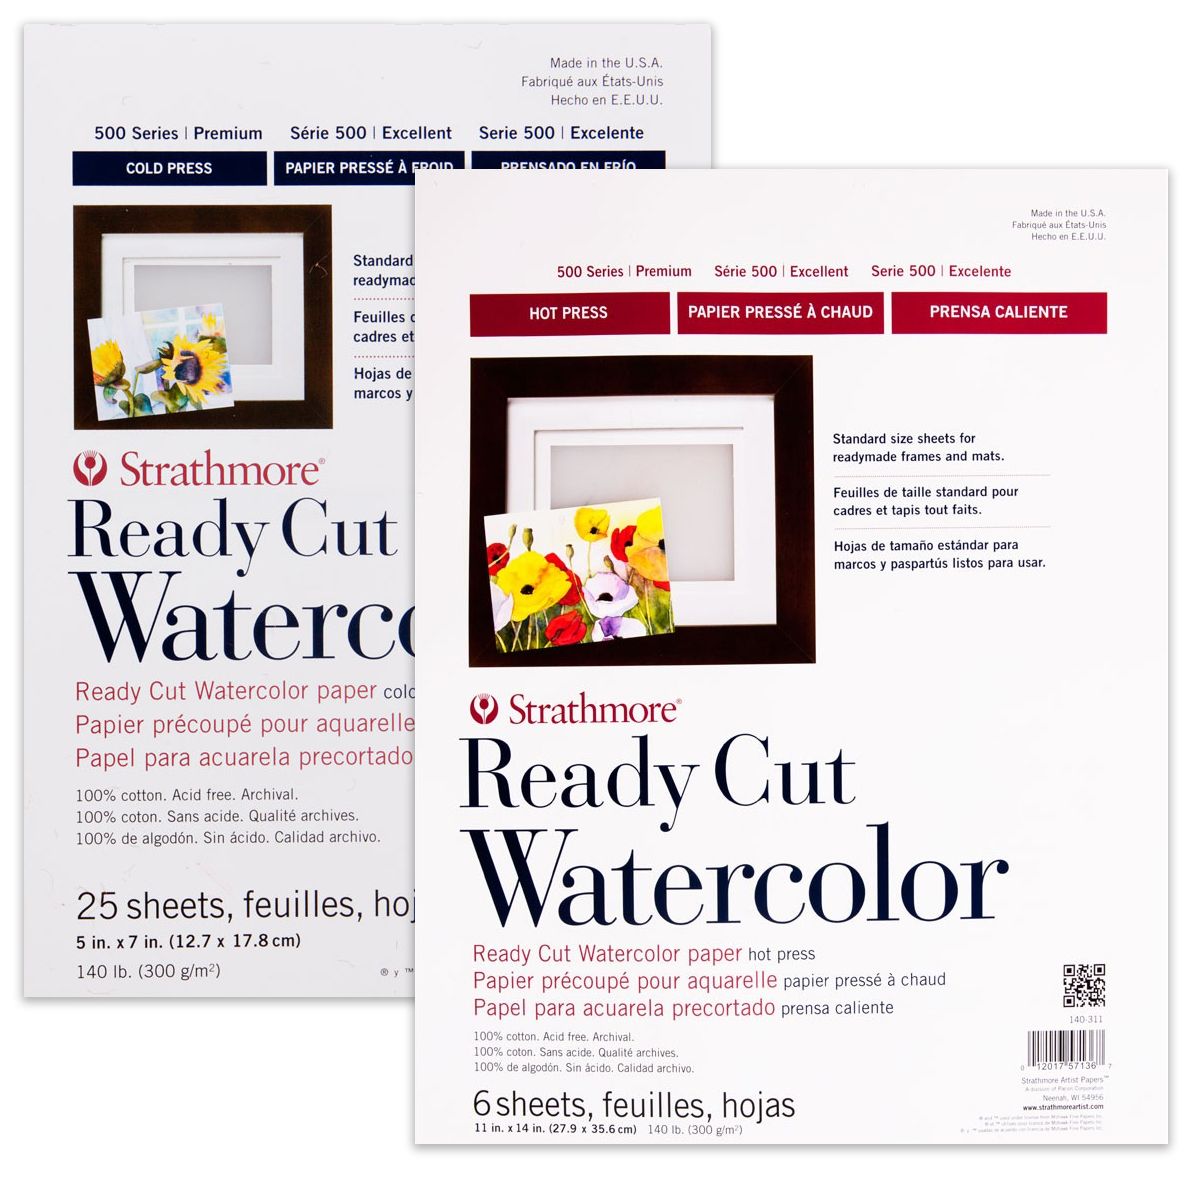 Strathmore Ready Cut Watercolor Paper